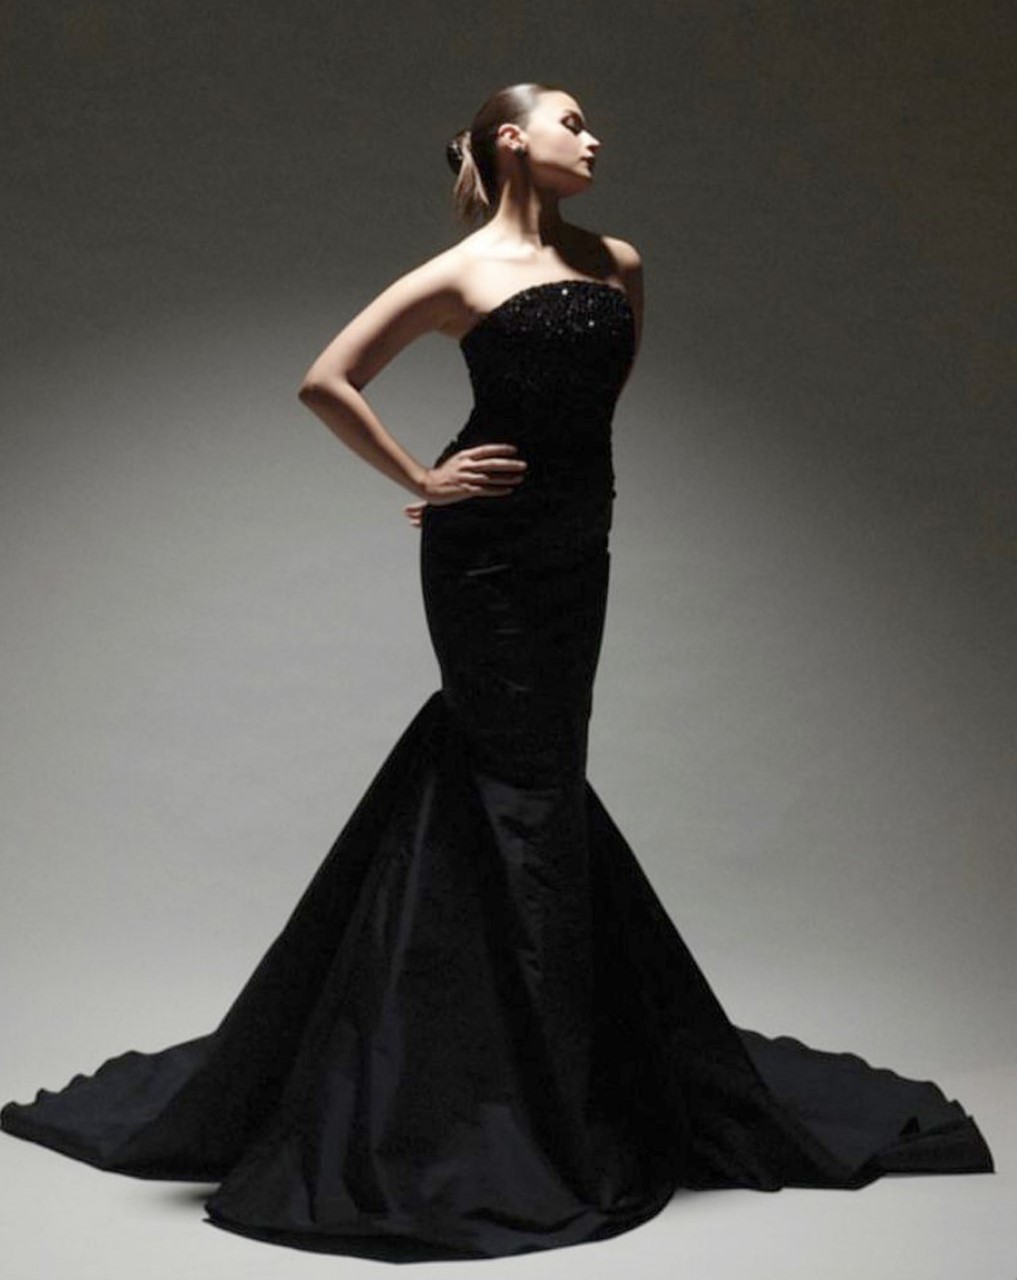 Alia Bhatt sets hearts racing at the Filmfare Awards in a show-stopping black gown that exudes elegance and drama